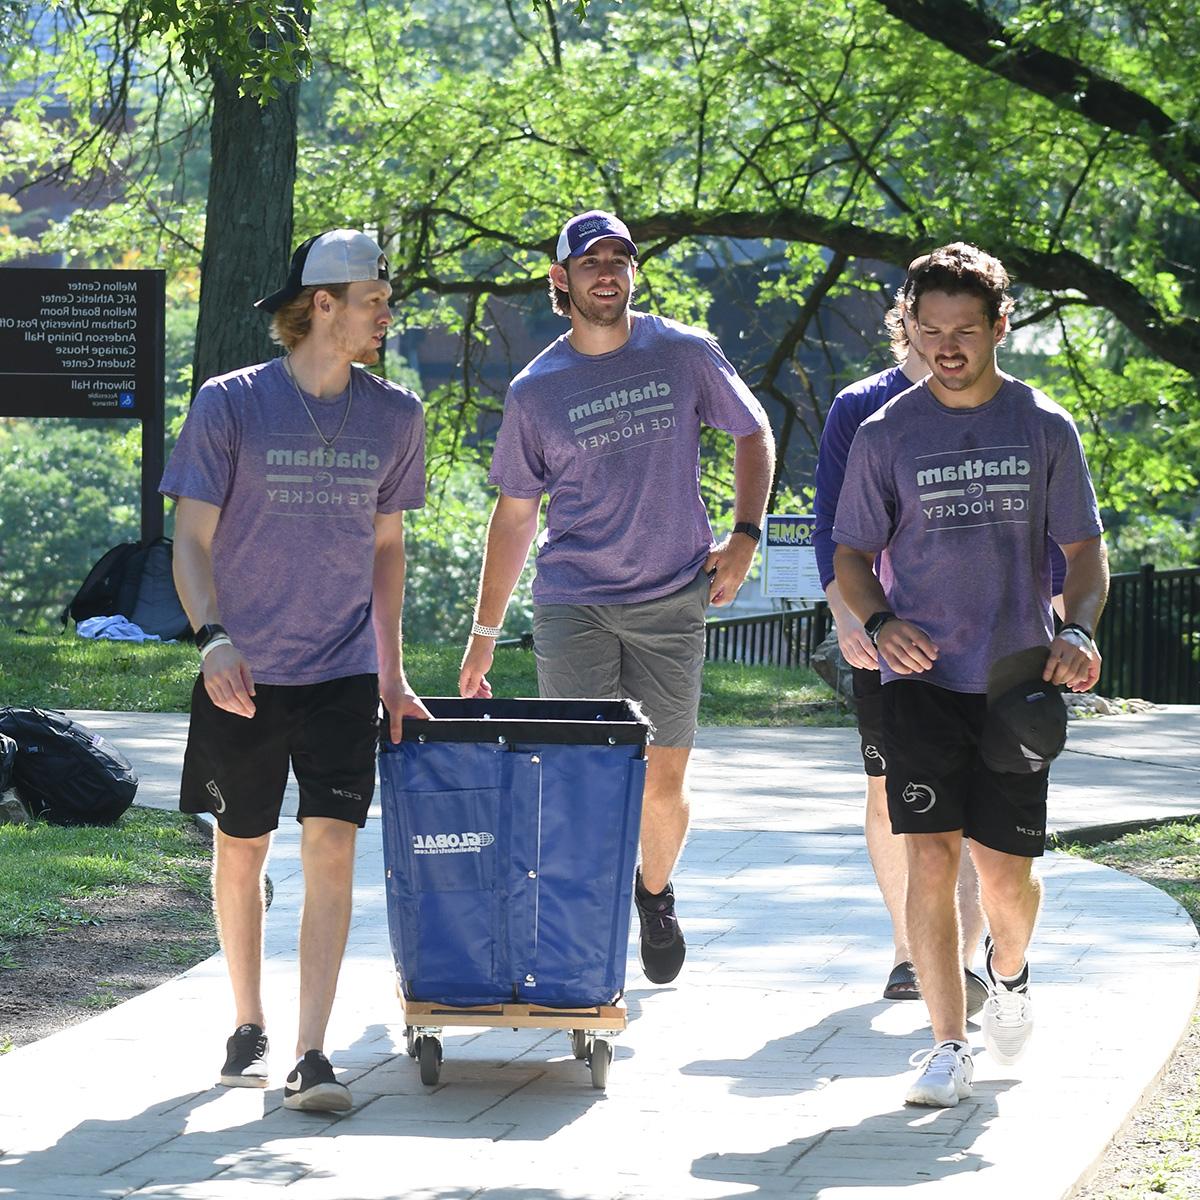 Photo of four young men wearing purple Chatham University Men's Hockey t-shirts and pushing a moving cart